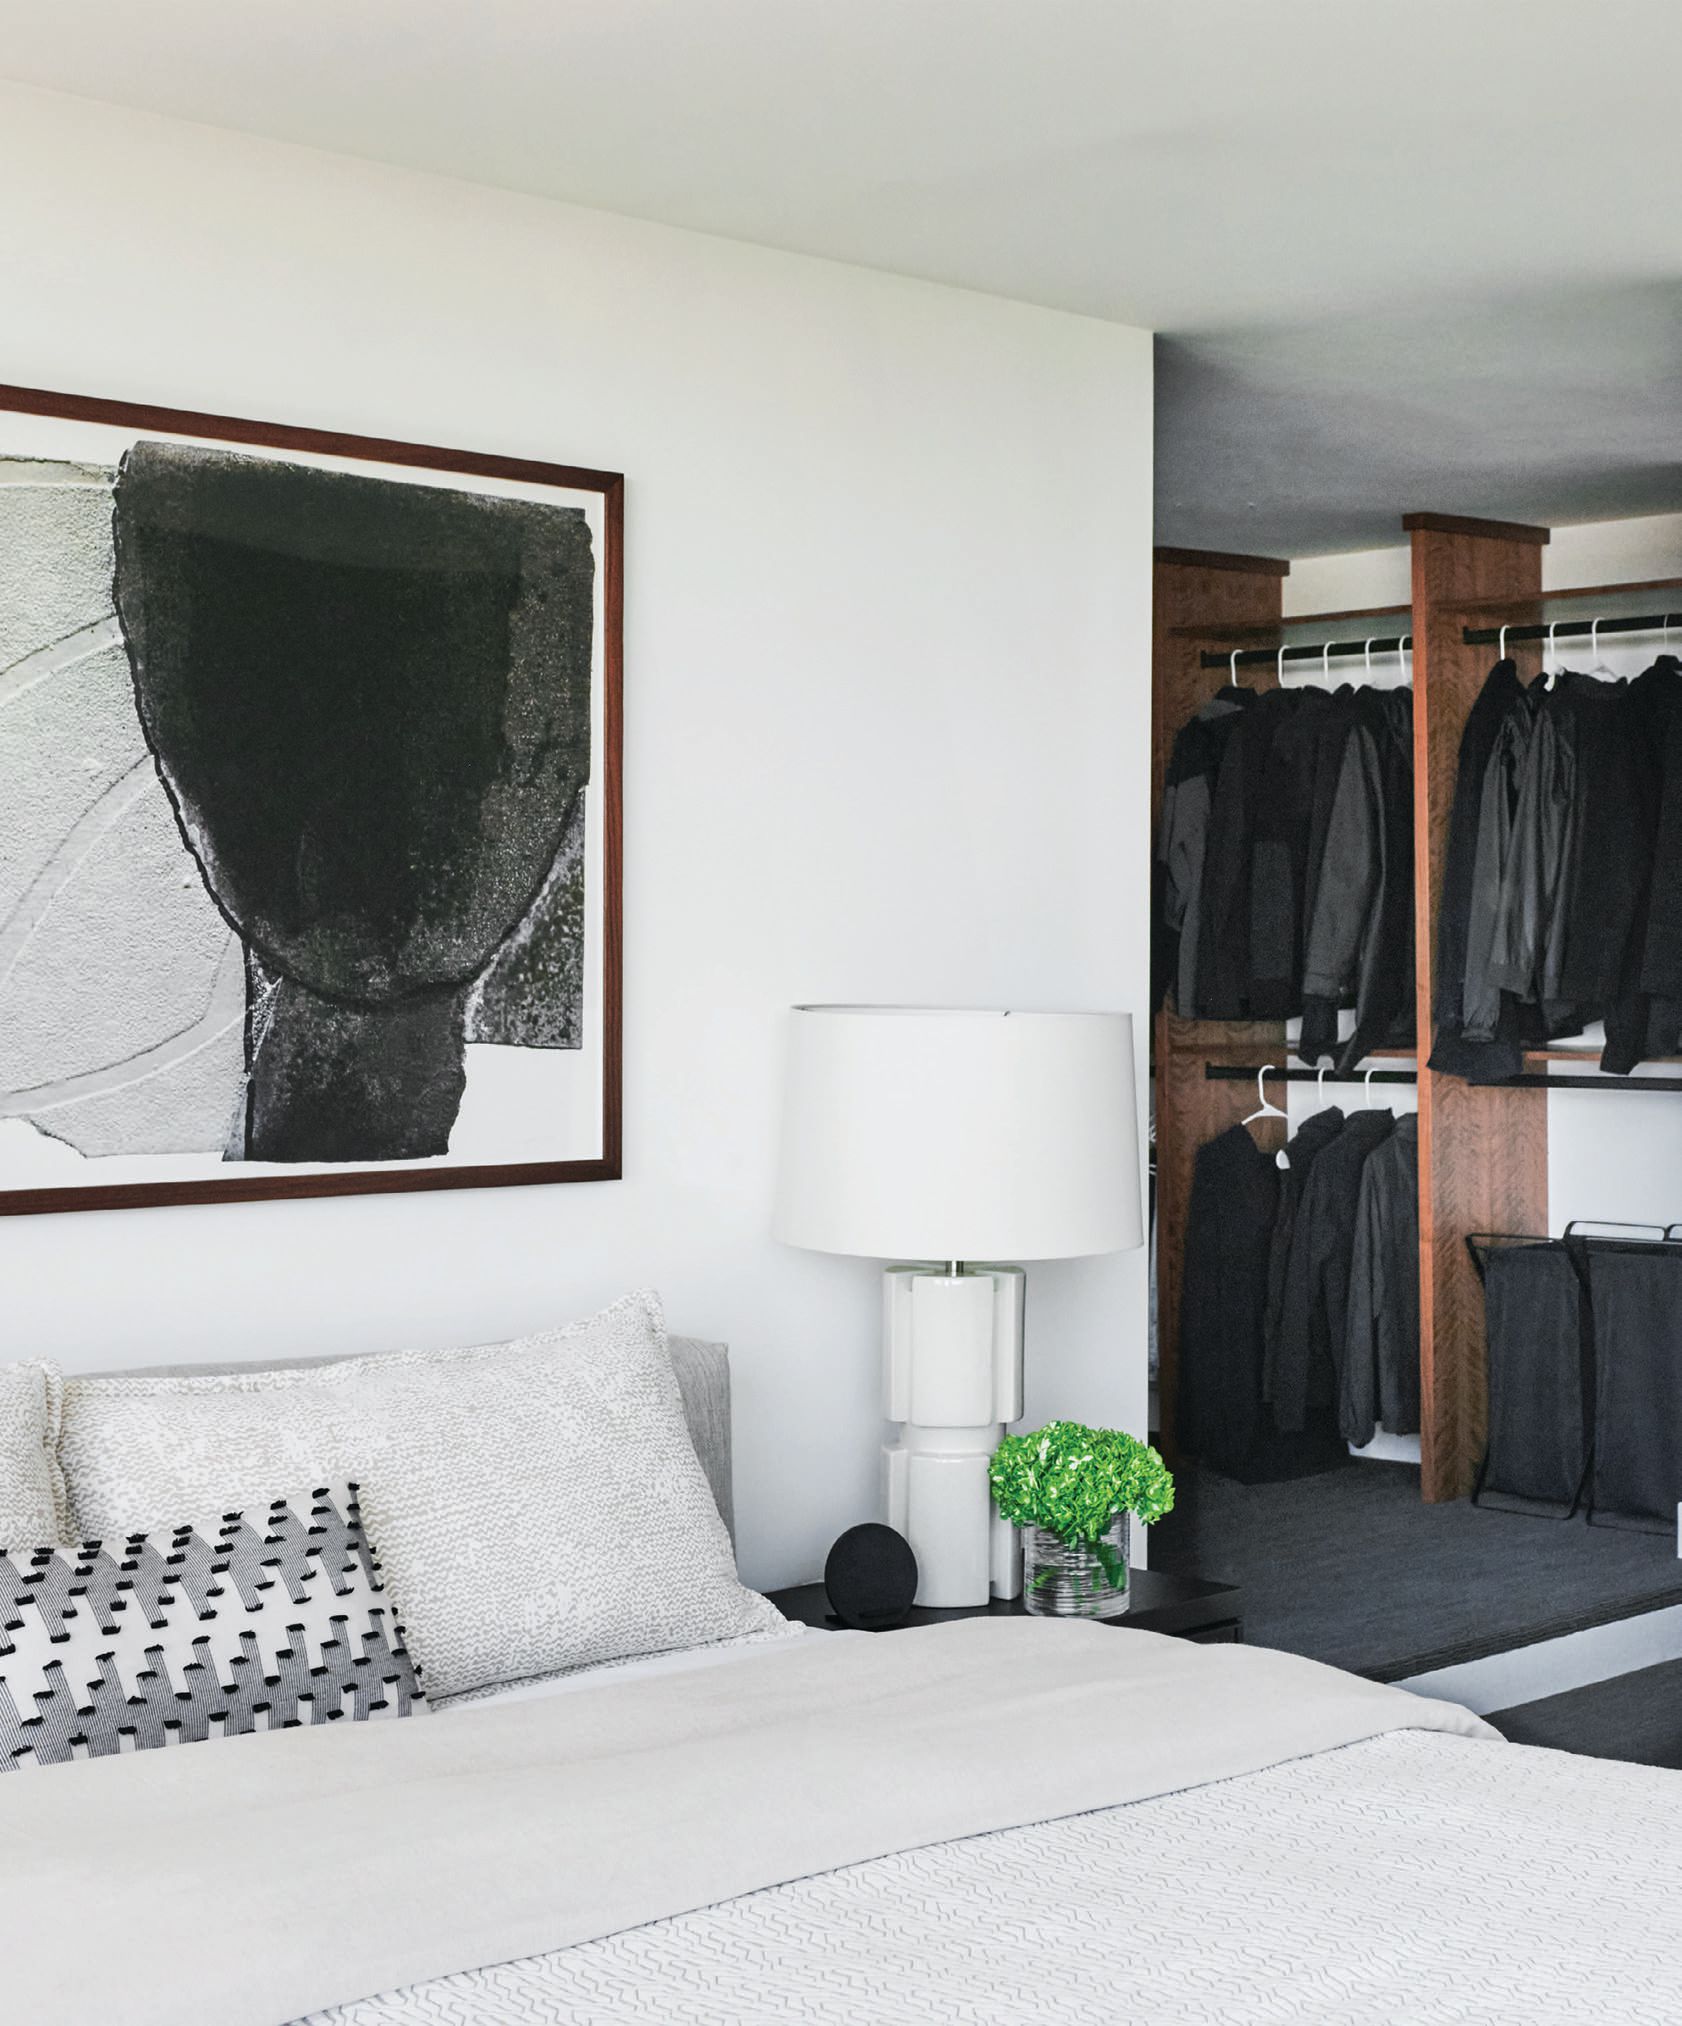 A Camerich bed is flanked by Arteriors lamps in this sleek and simple bedroom. PHOTO COURTESY OF BRIAN BROWN STUDIOS